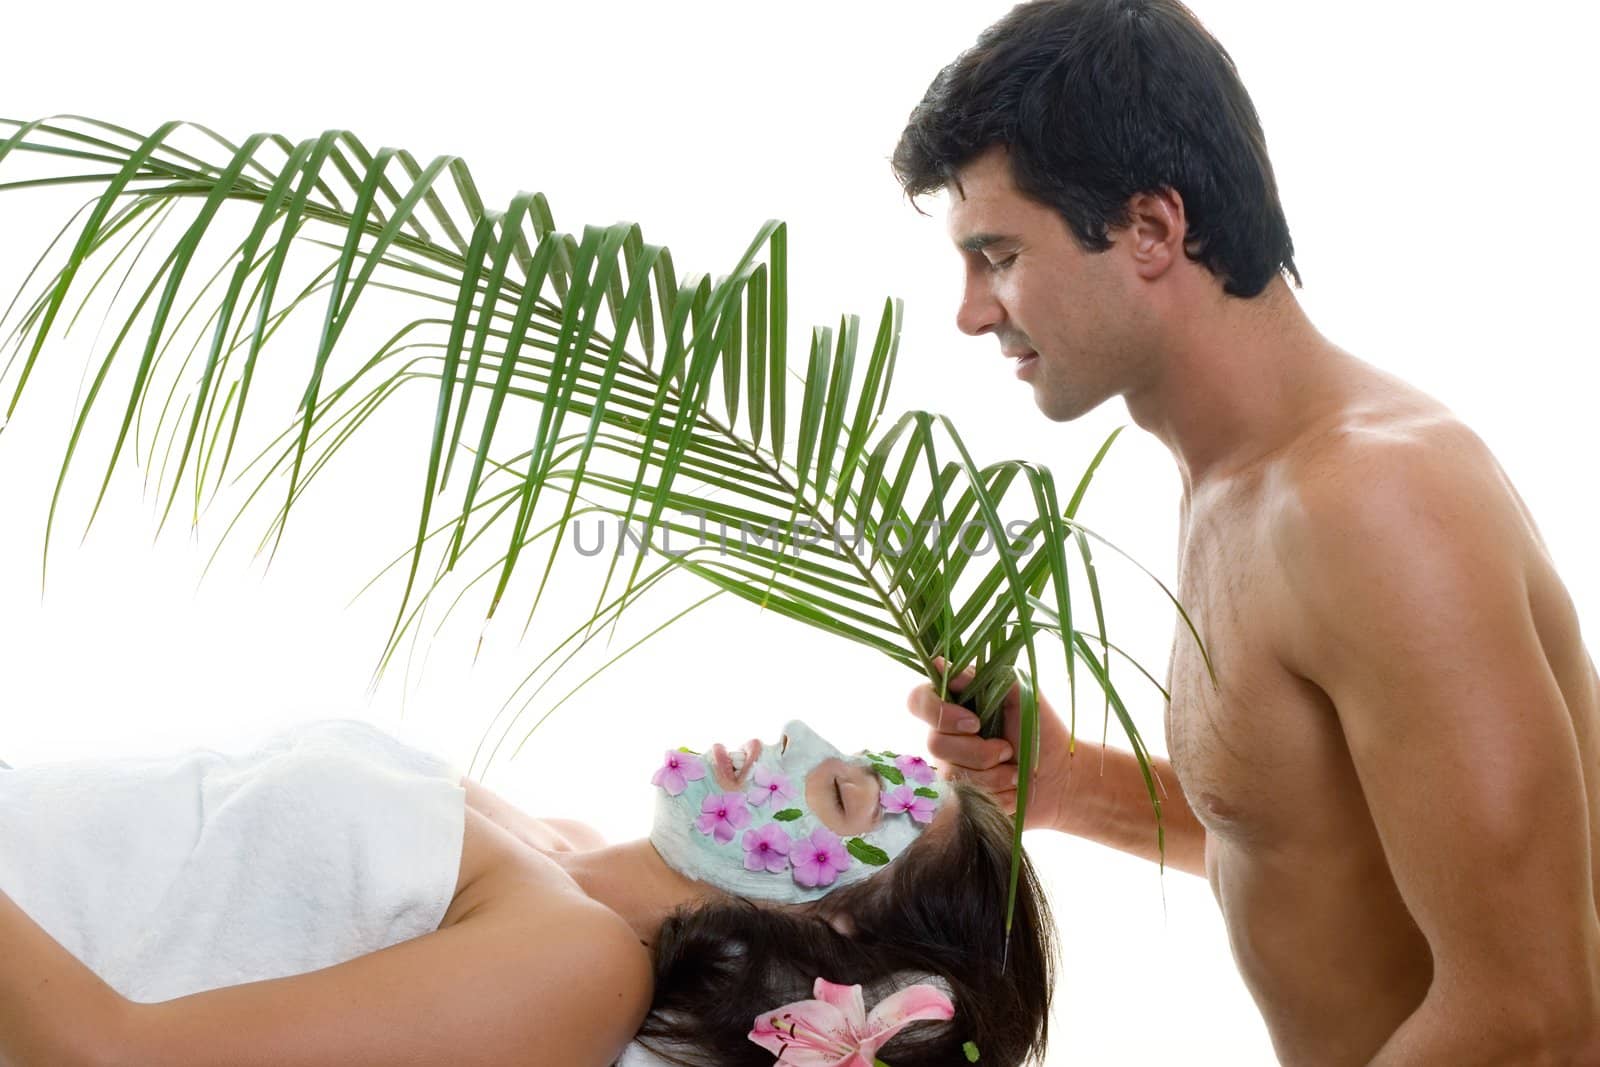 A young woman is gently fanned with a palm frond at a day spa,  exotic resort salon or perhaps she is pampered by her husband or lover